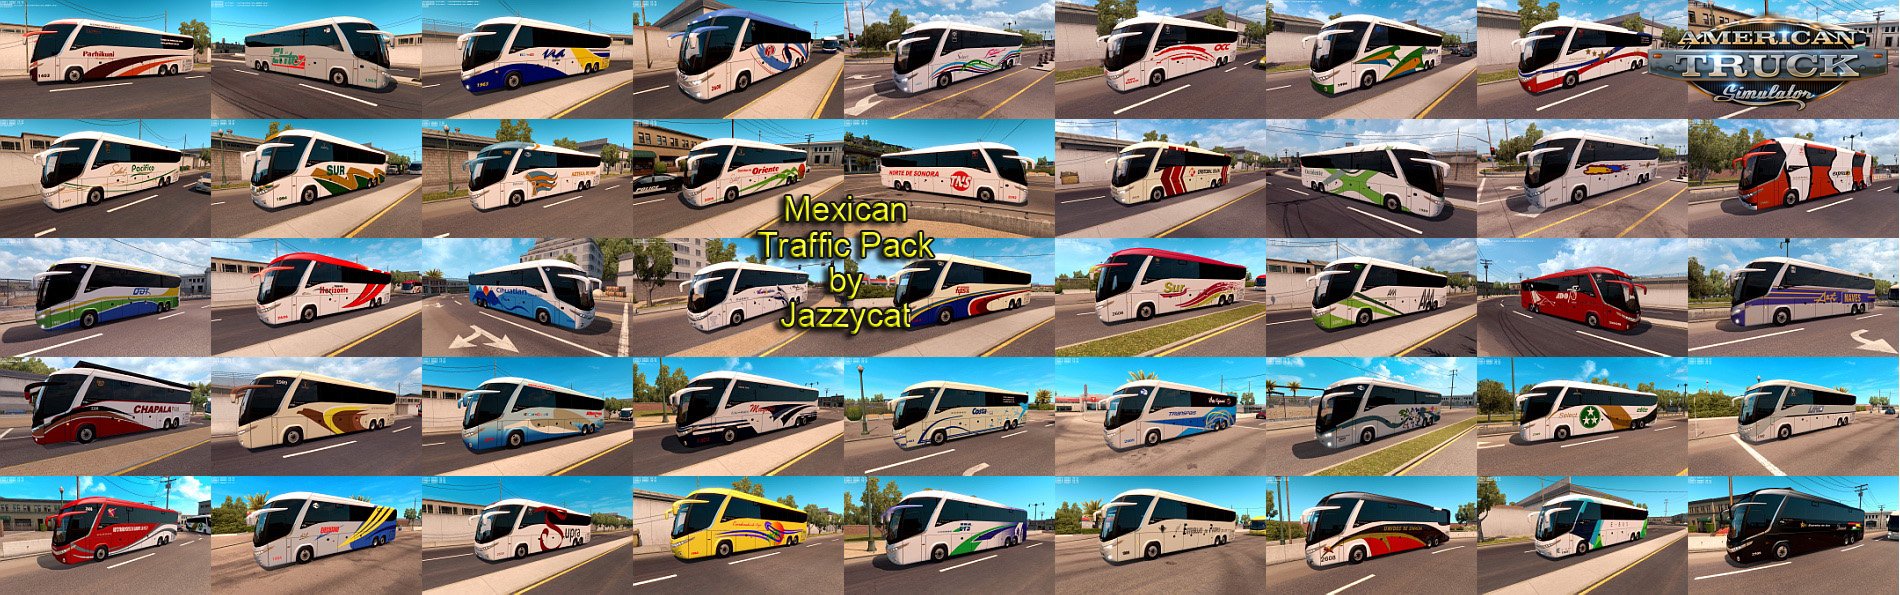 Mexican Traffic Pack v1.2 for Ats